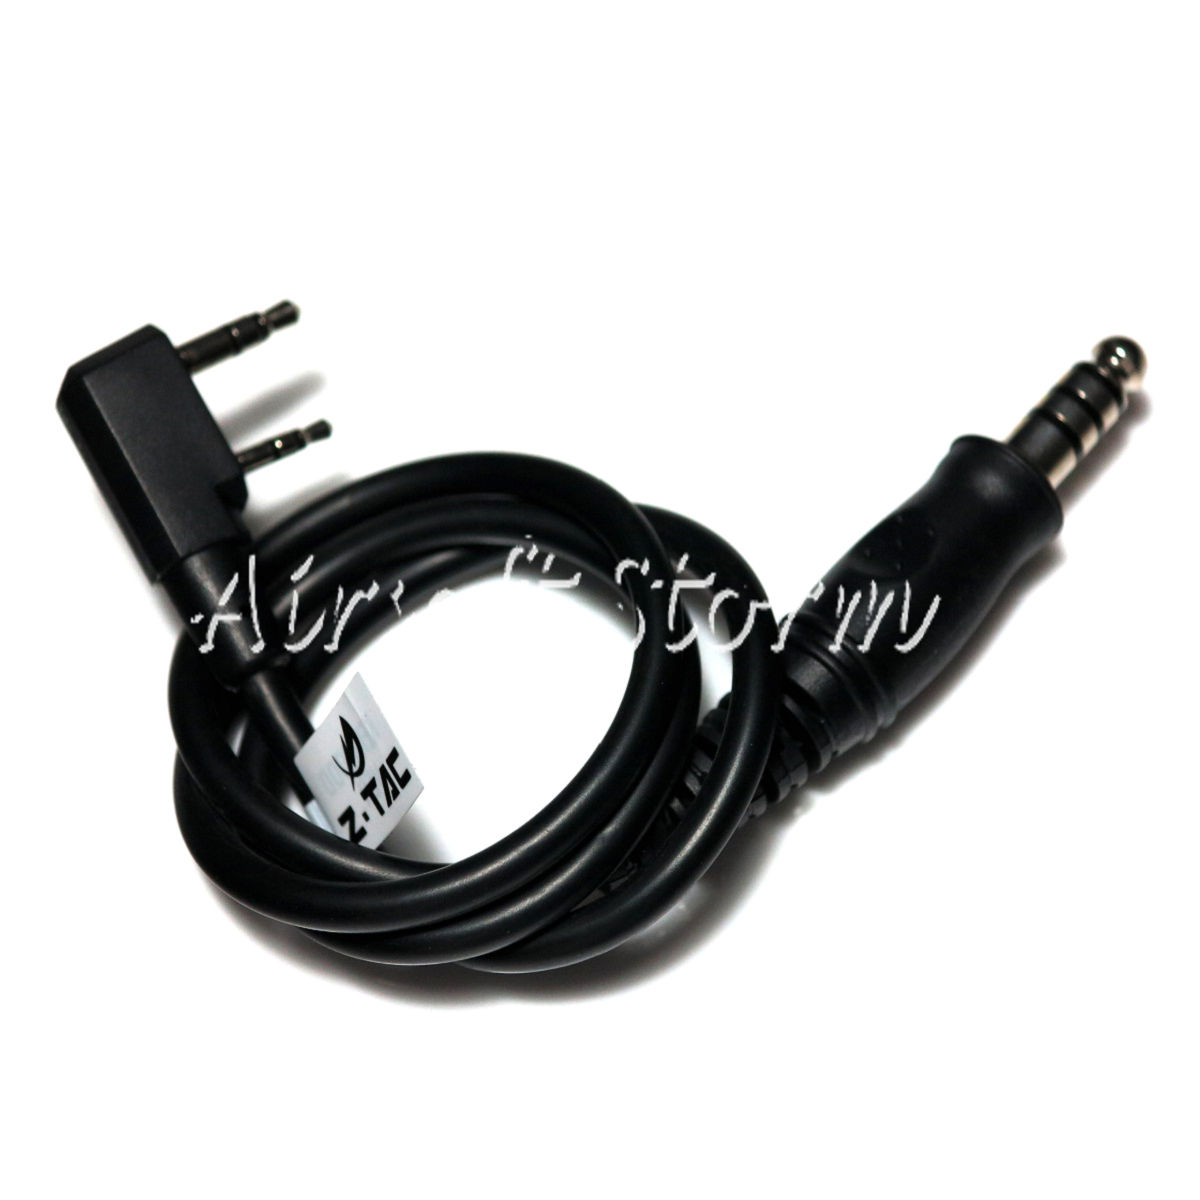 Airsoft SWAT Communications Gear Z Tactical Electronic PTT Wire for ICOM Radio